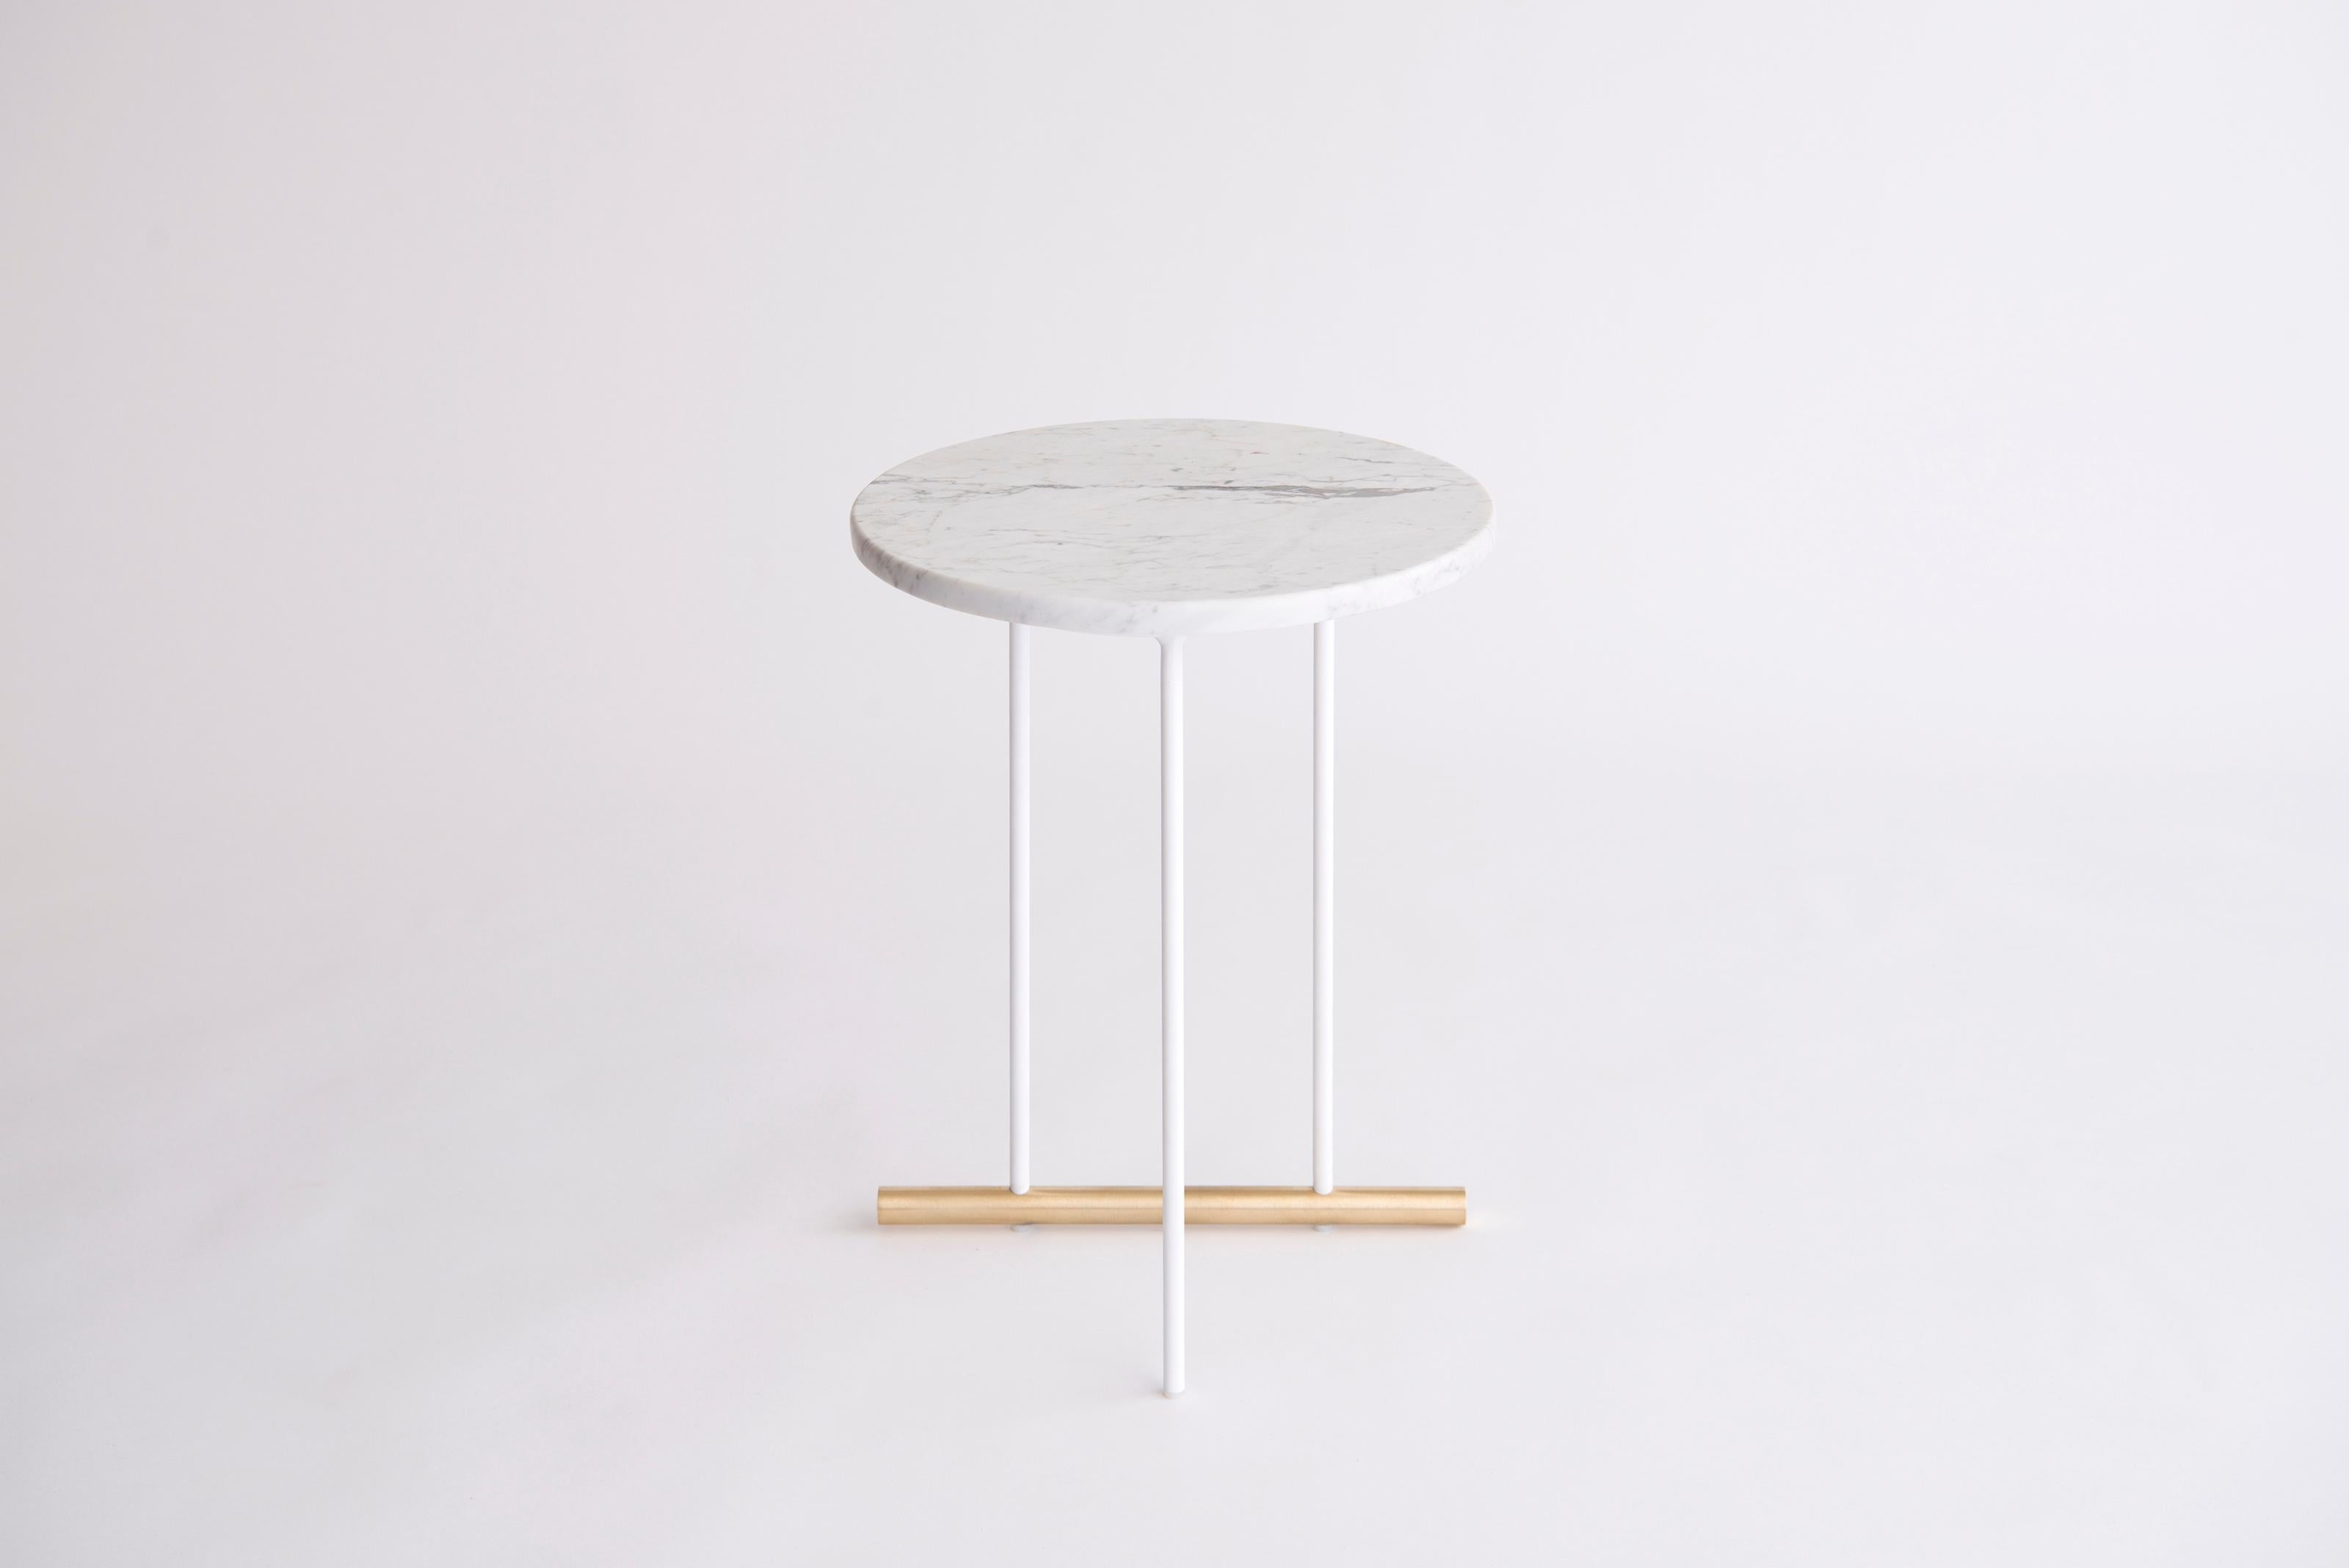 Icon Small White Carrara Side Table by Phase Design
Dimensions: Ø 38,1 H 51.5 cm. 
Materials: White Carrara marble, powder-coated metal and brushed brass.

Solid steel and brass with glass, marble, or solid wooden tops. Steel bar available in a flat